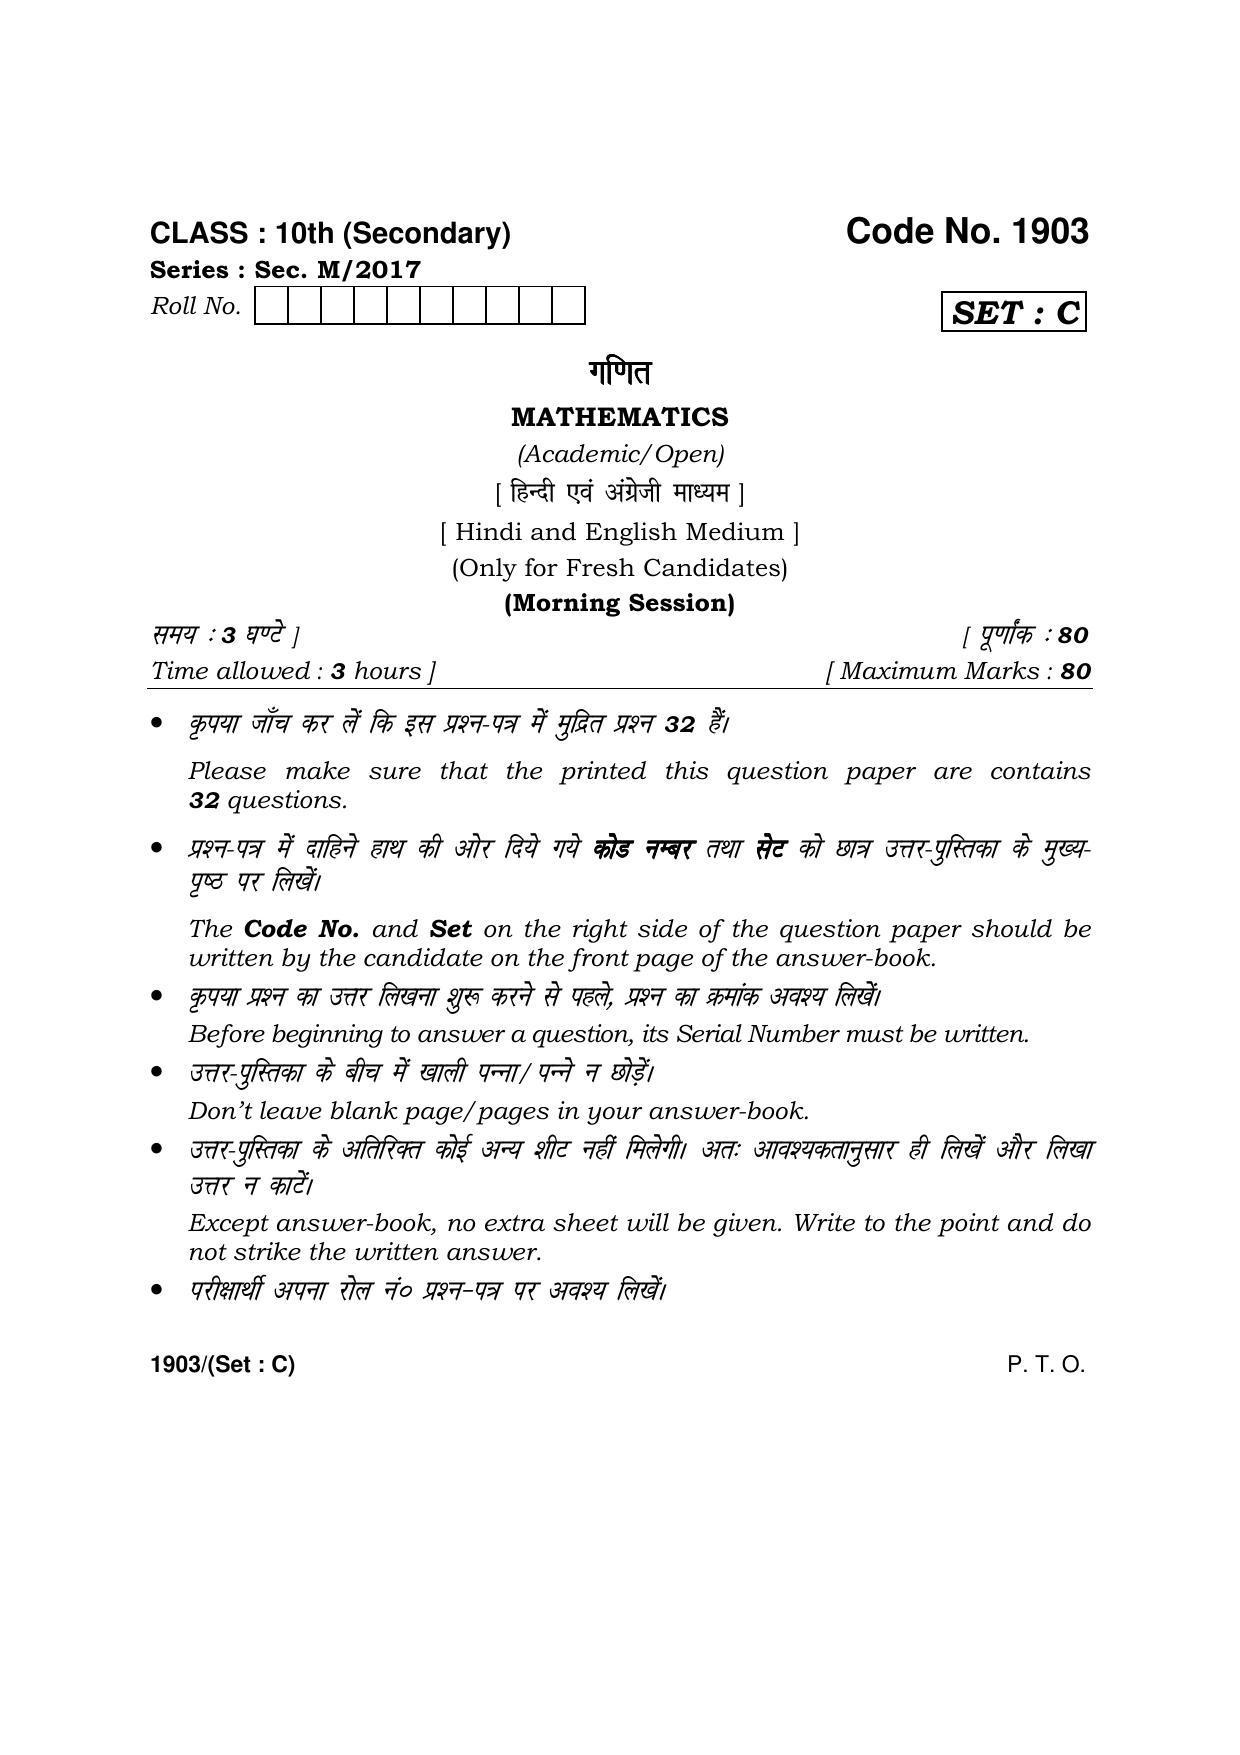 Haryana Board HBSE Class 10 Mathematics -C 2017 Question Paper - Page 1